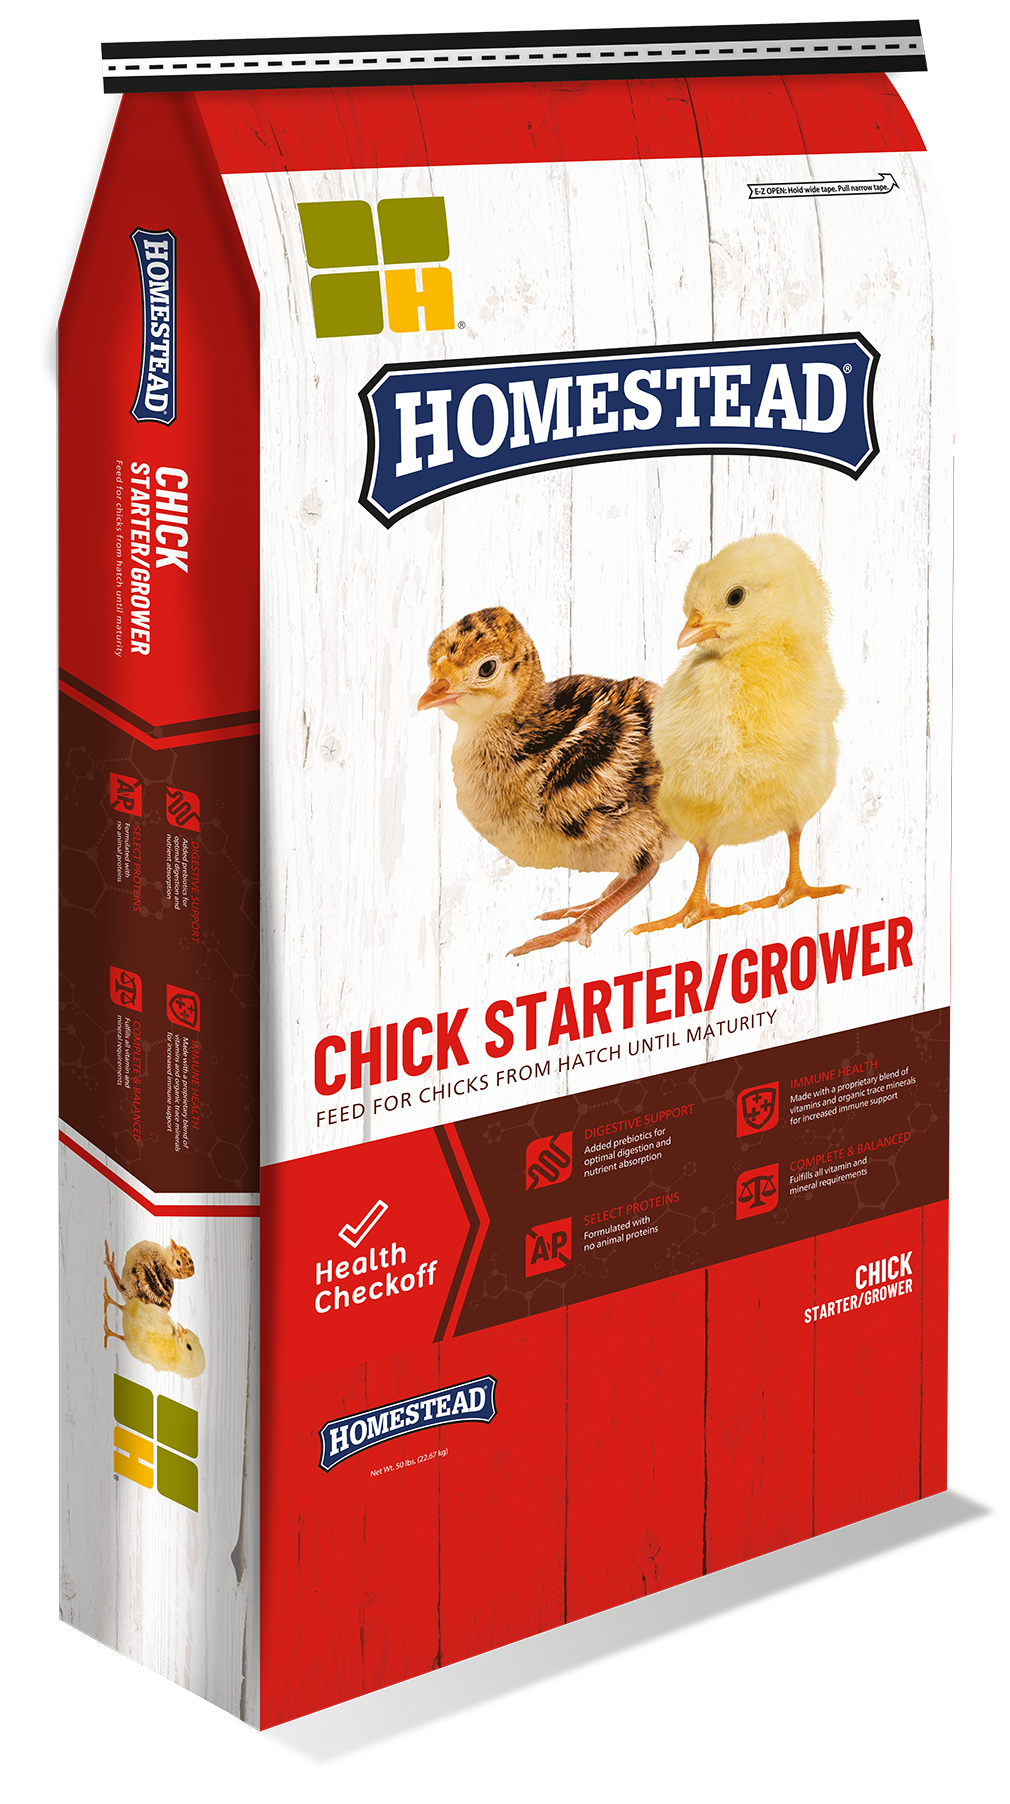 Grower feed for chickens